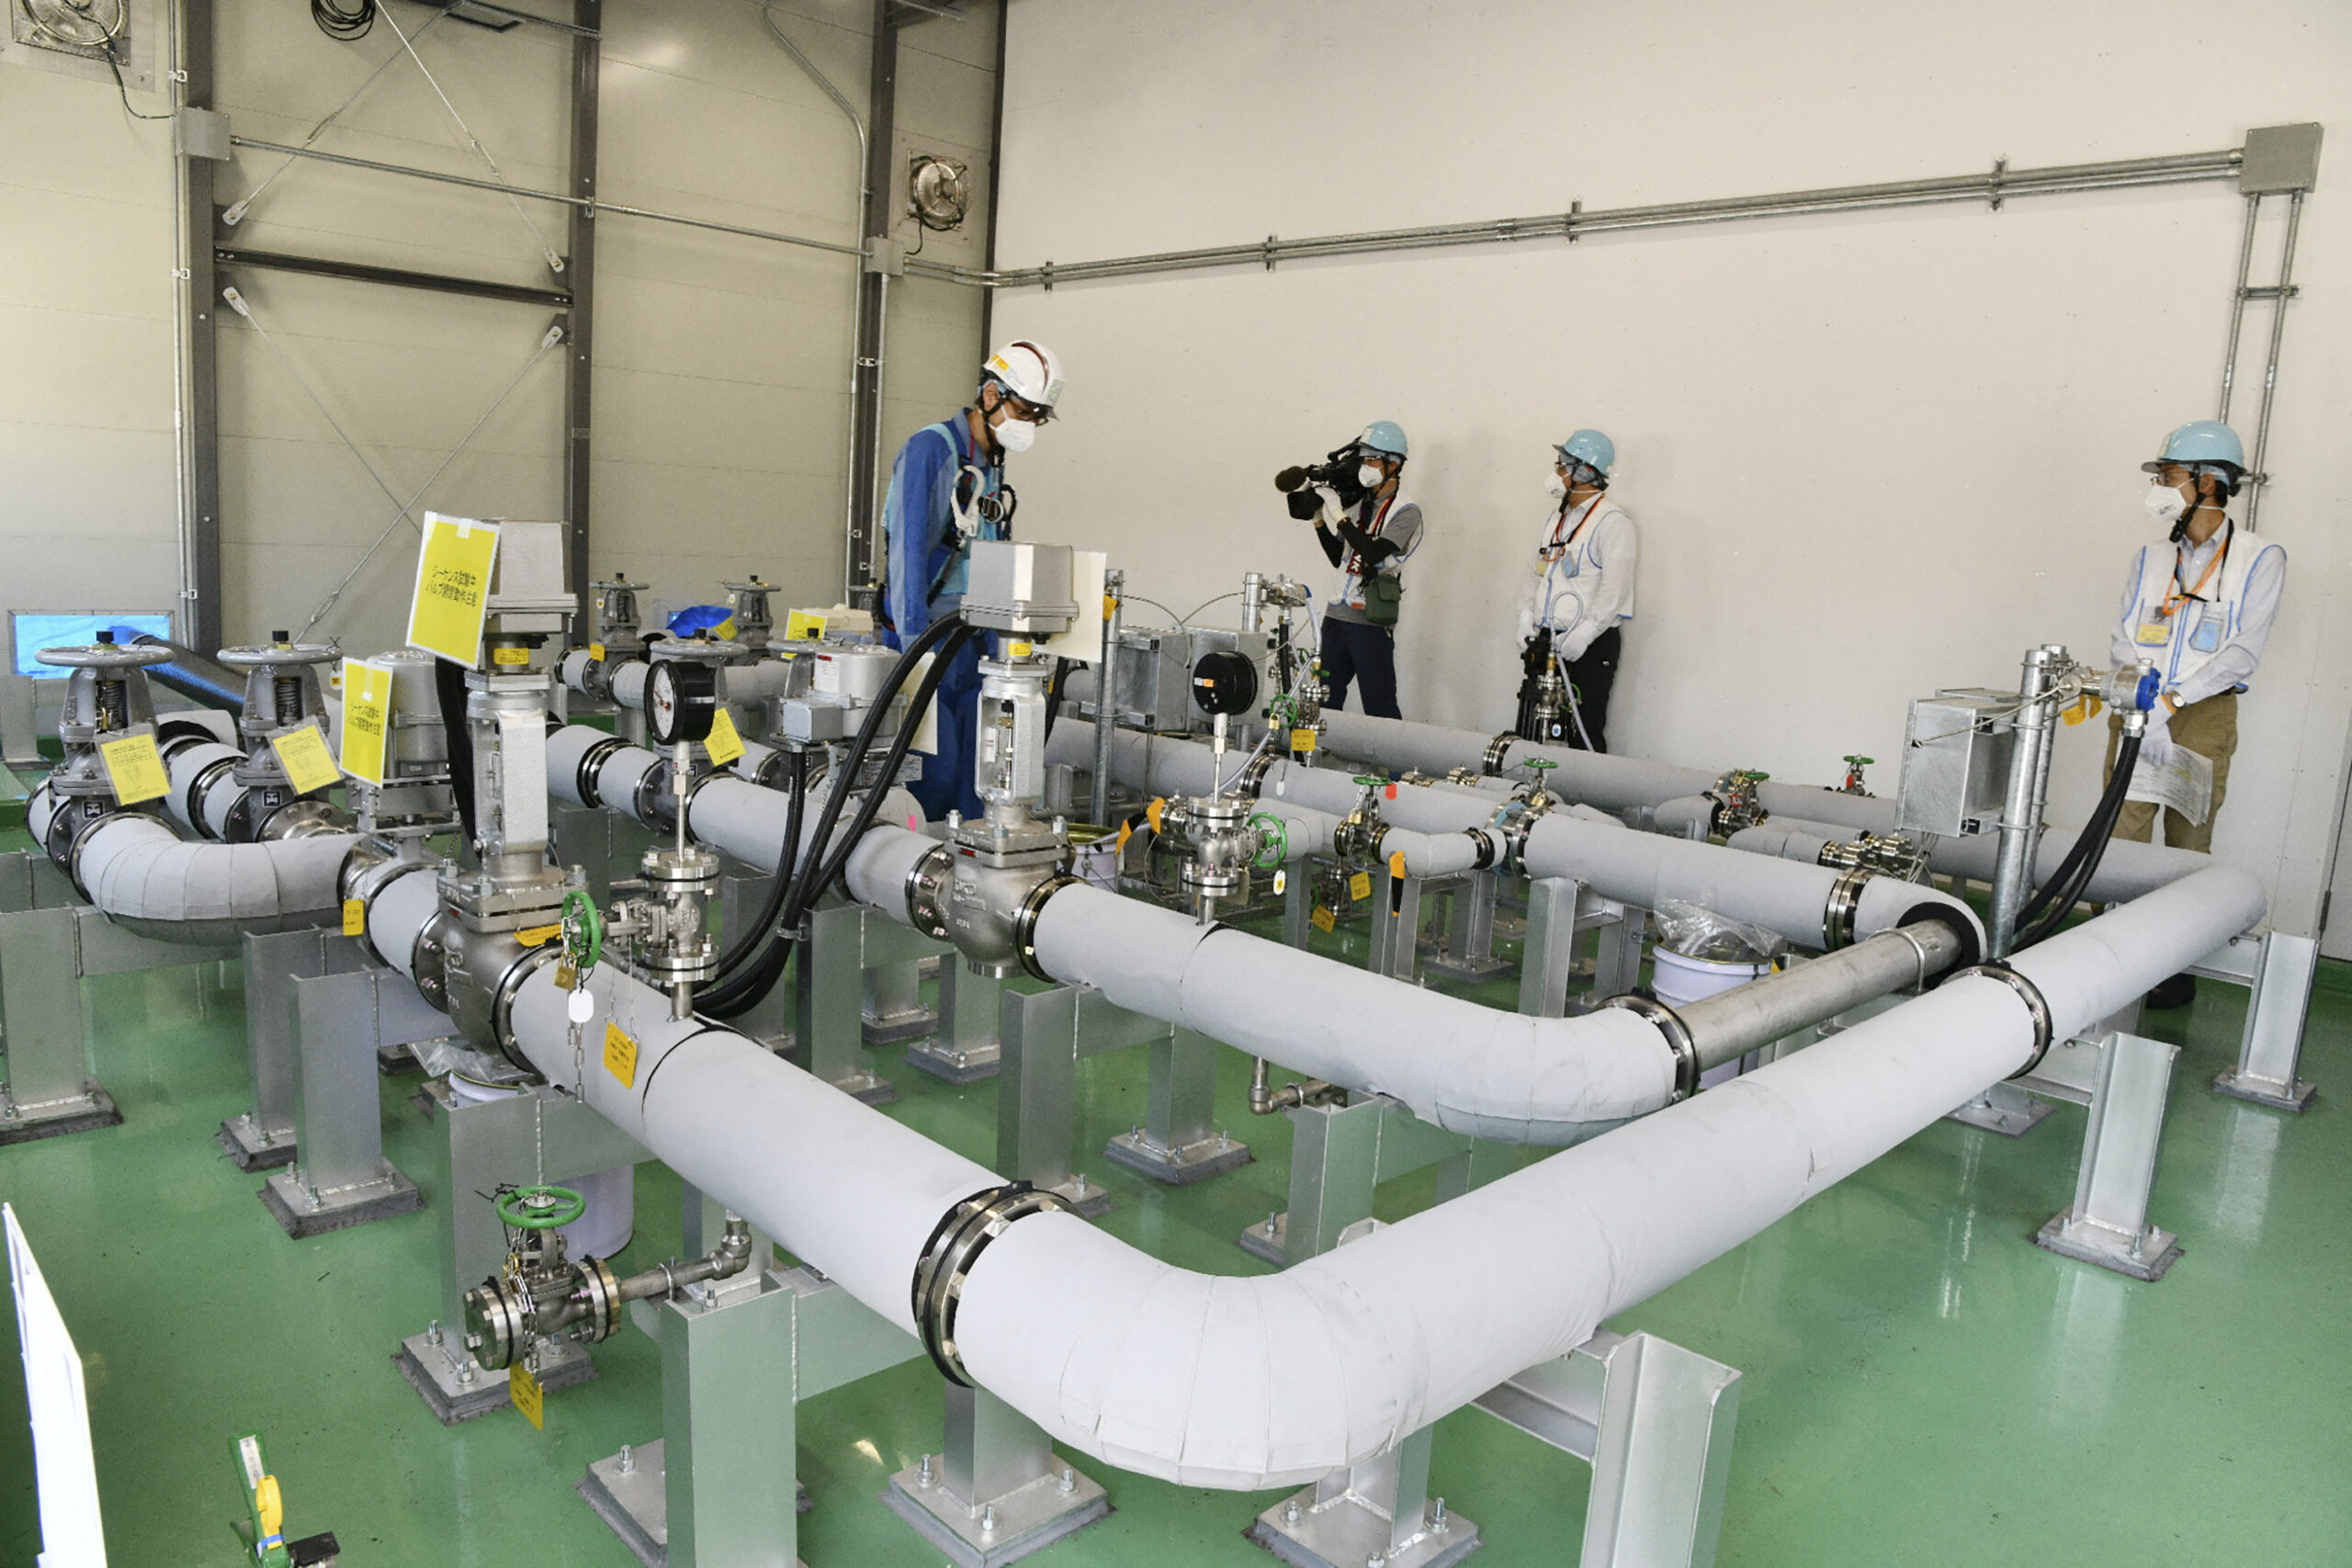 Water release resumes after partial power outage at Fukushima plant